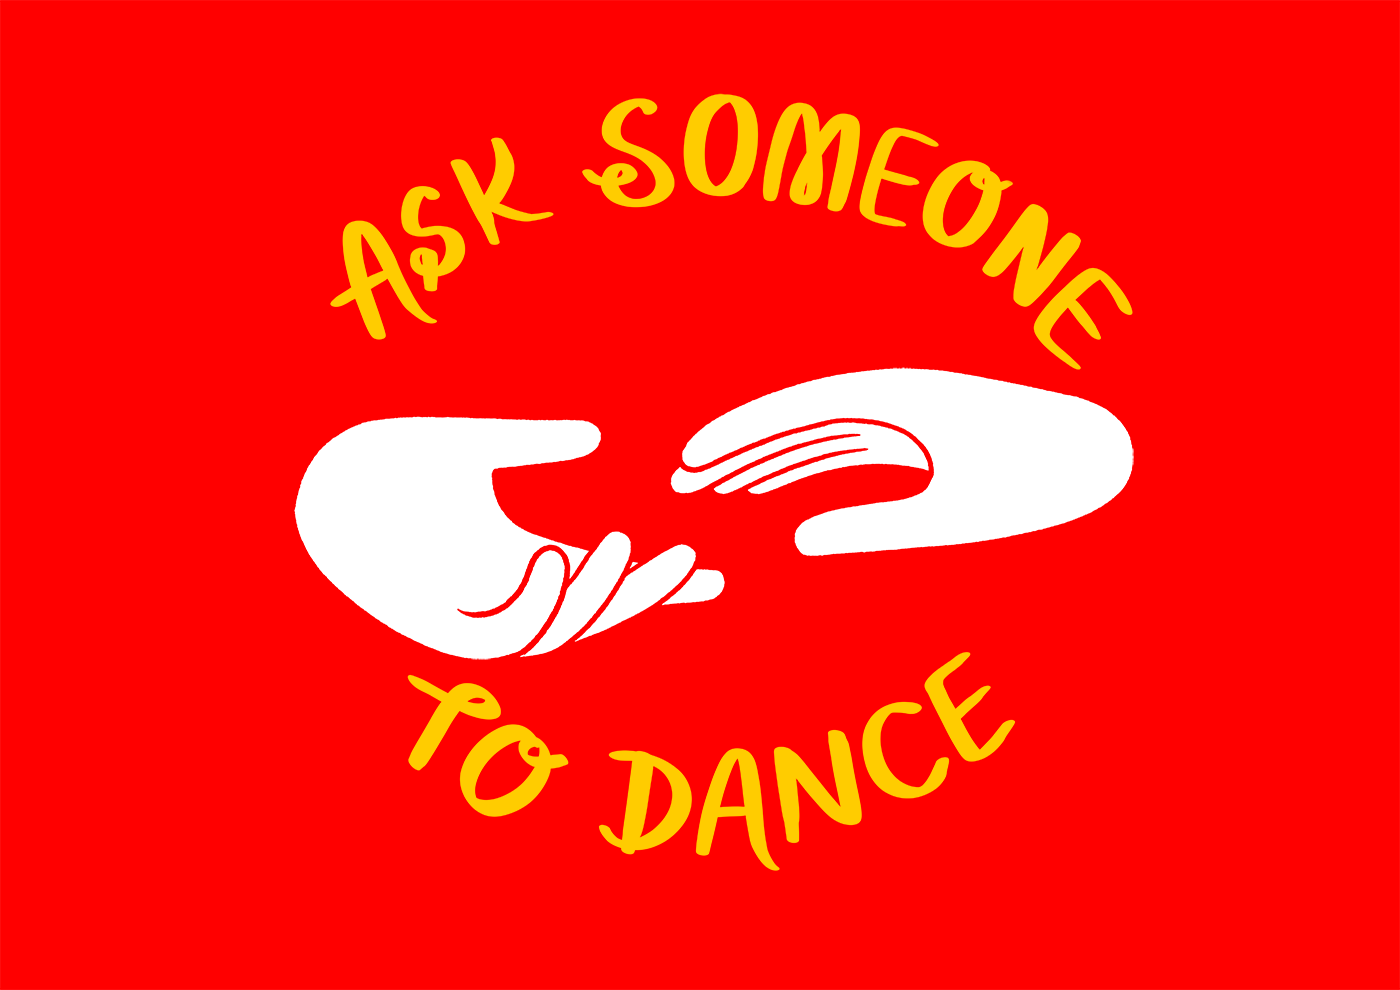 Ask someone to dance